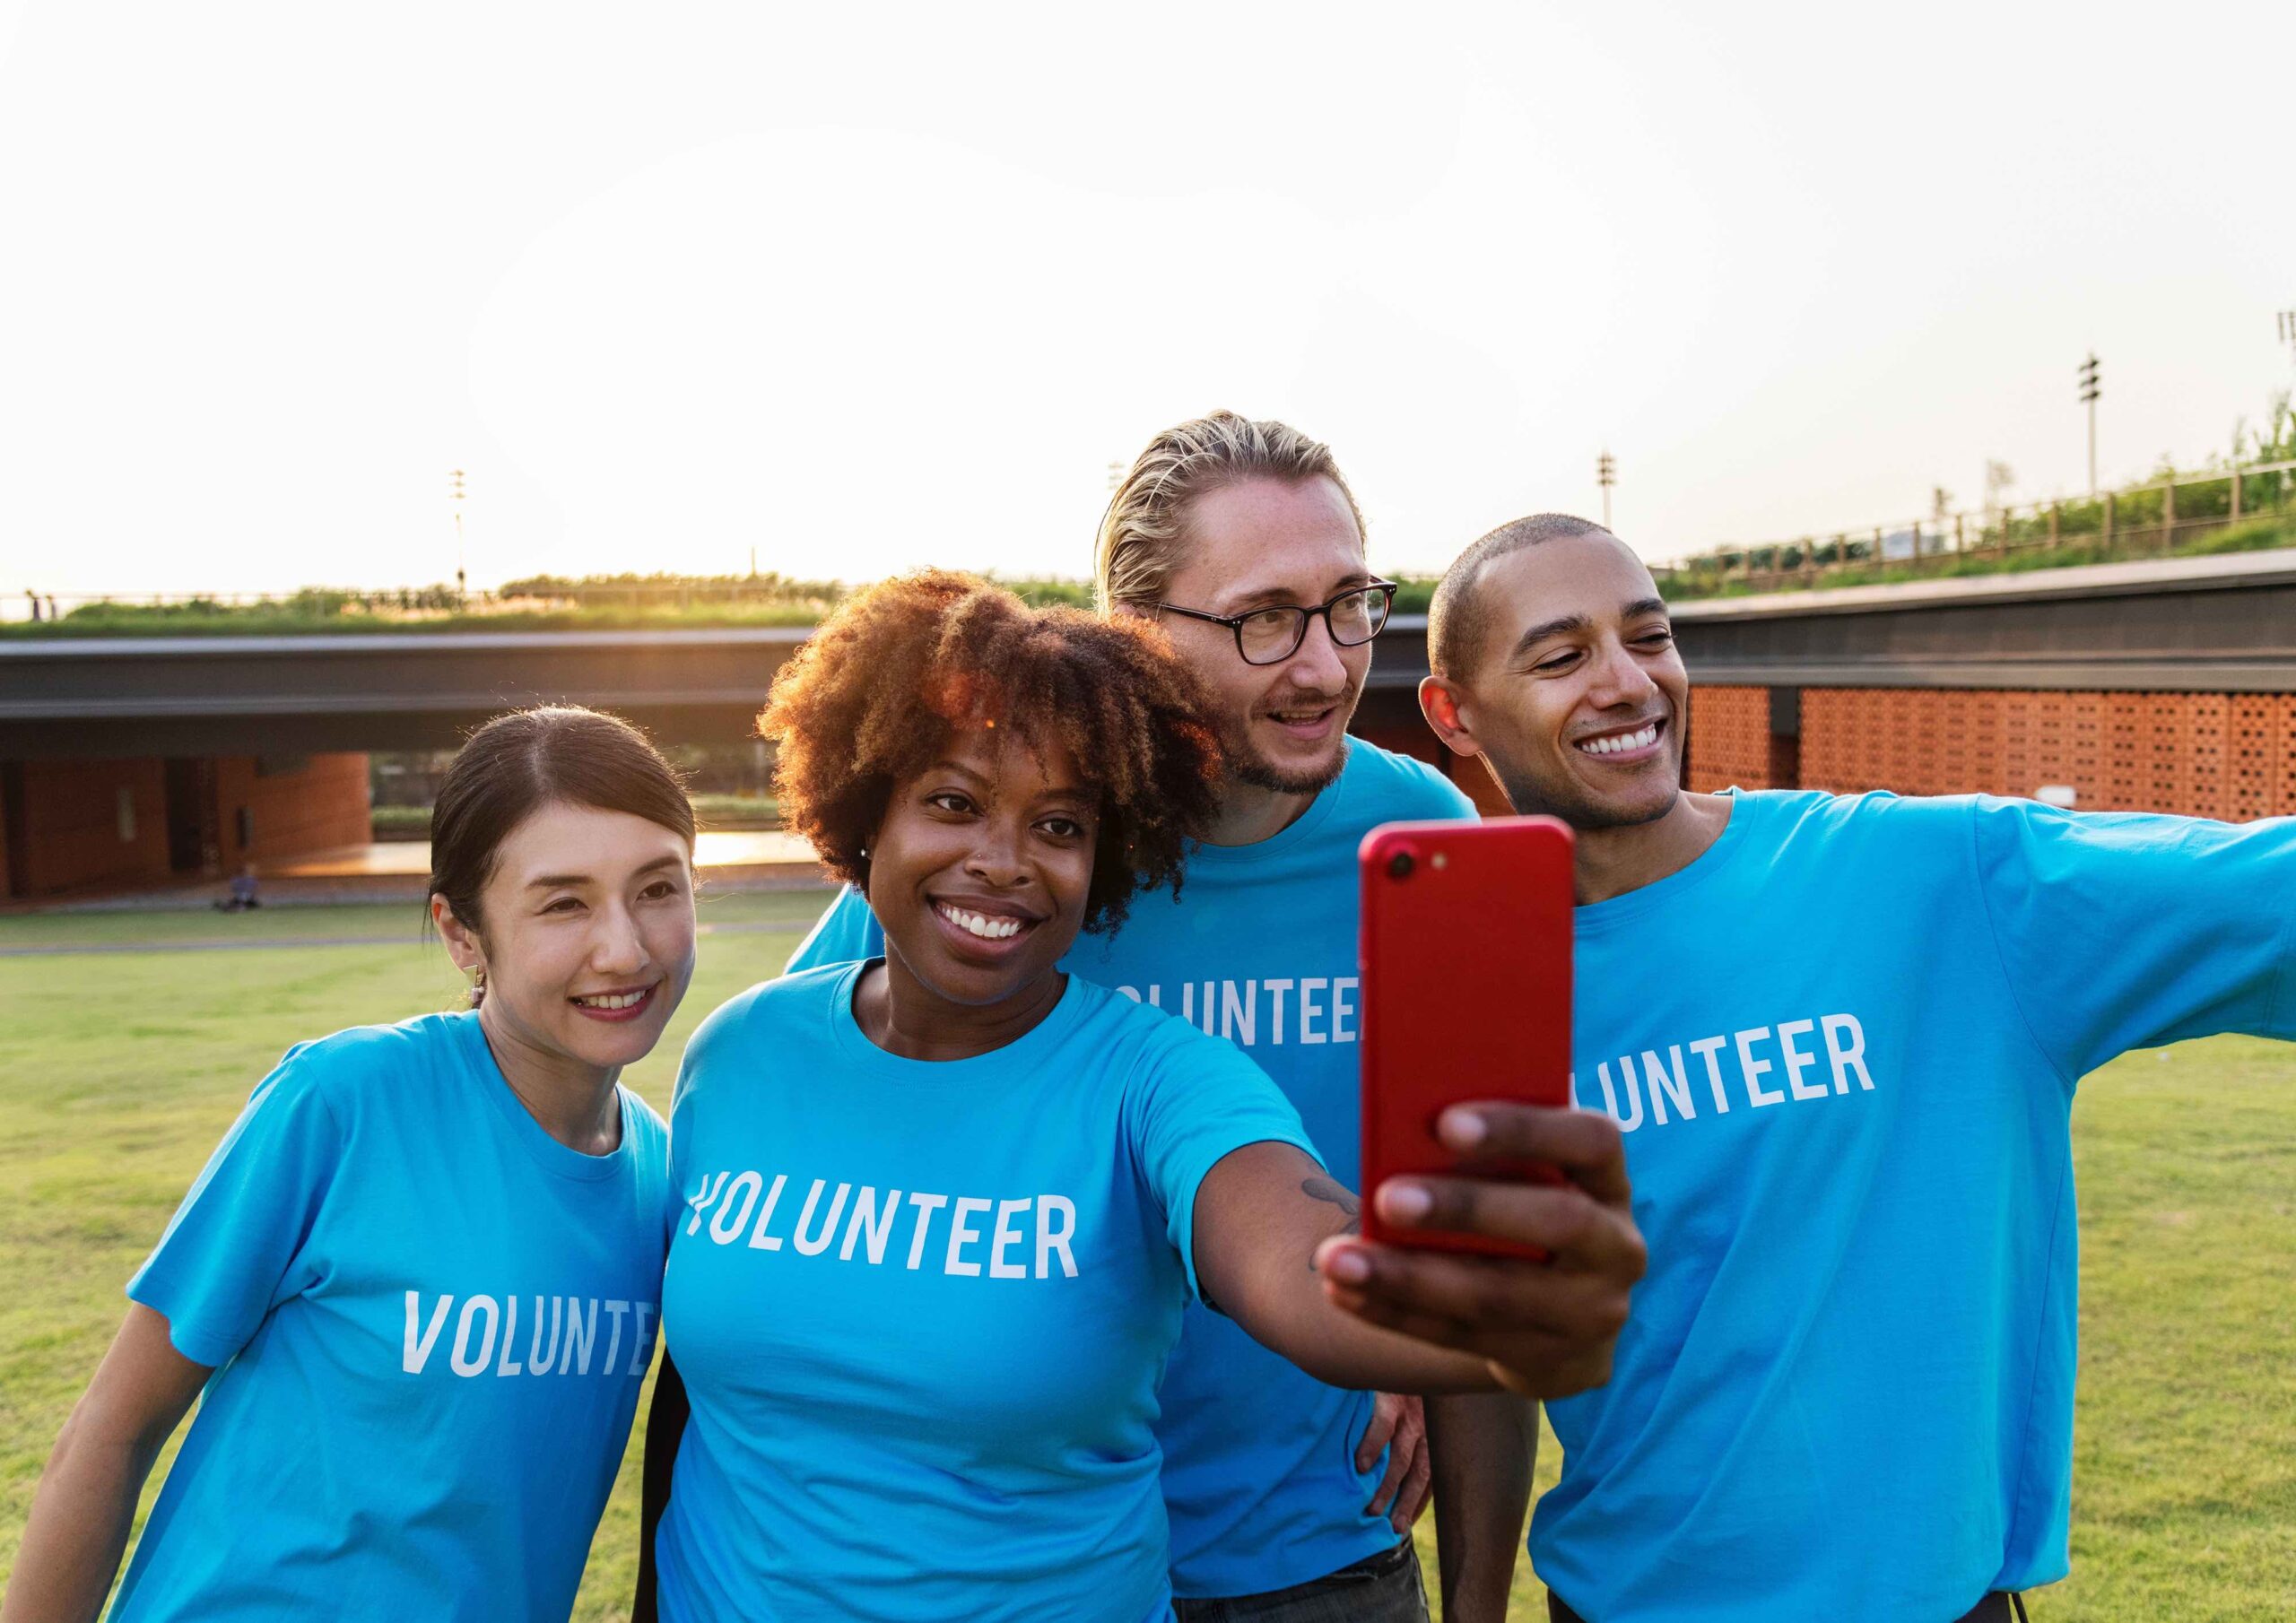 Body Avoidance and Photos in eating disorder recovery in California [Image description: photo of 4 diverse people in "volunteer" shirts taking a selfie] represents a potential client with an eating disorder in Los Angeles, California staying in the photo